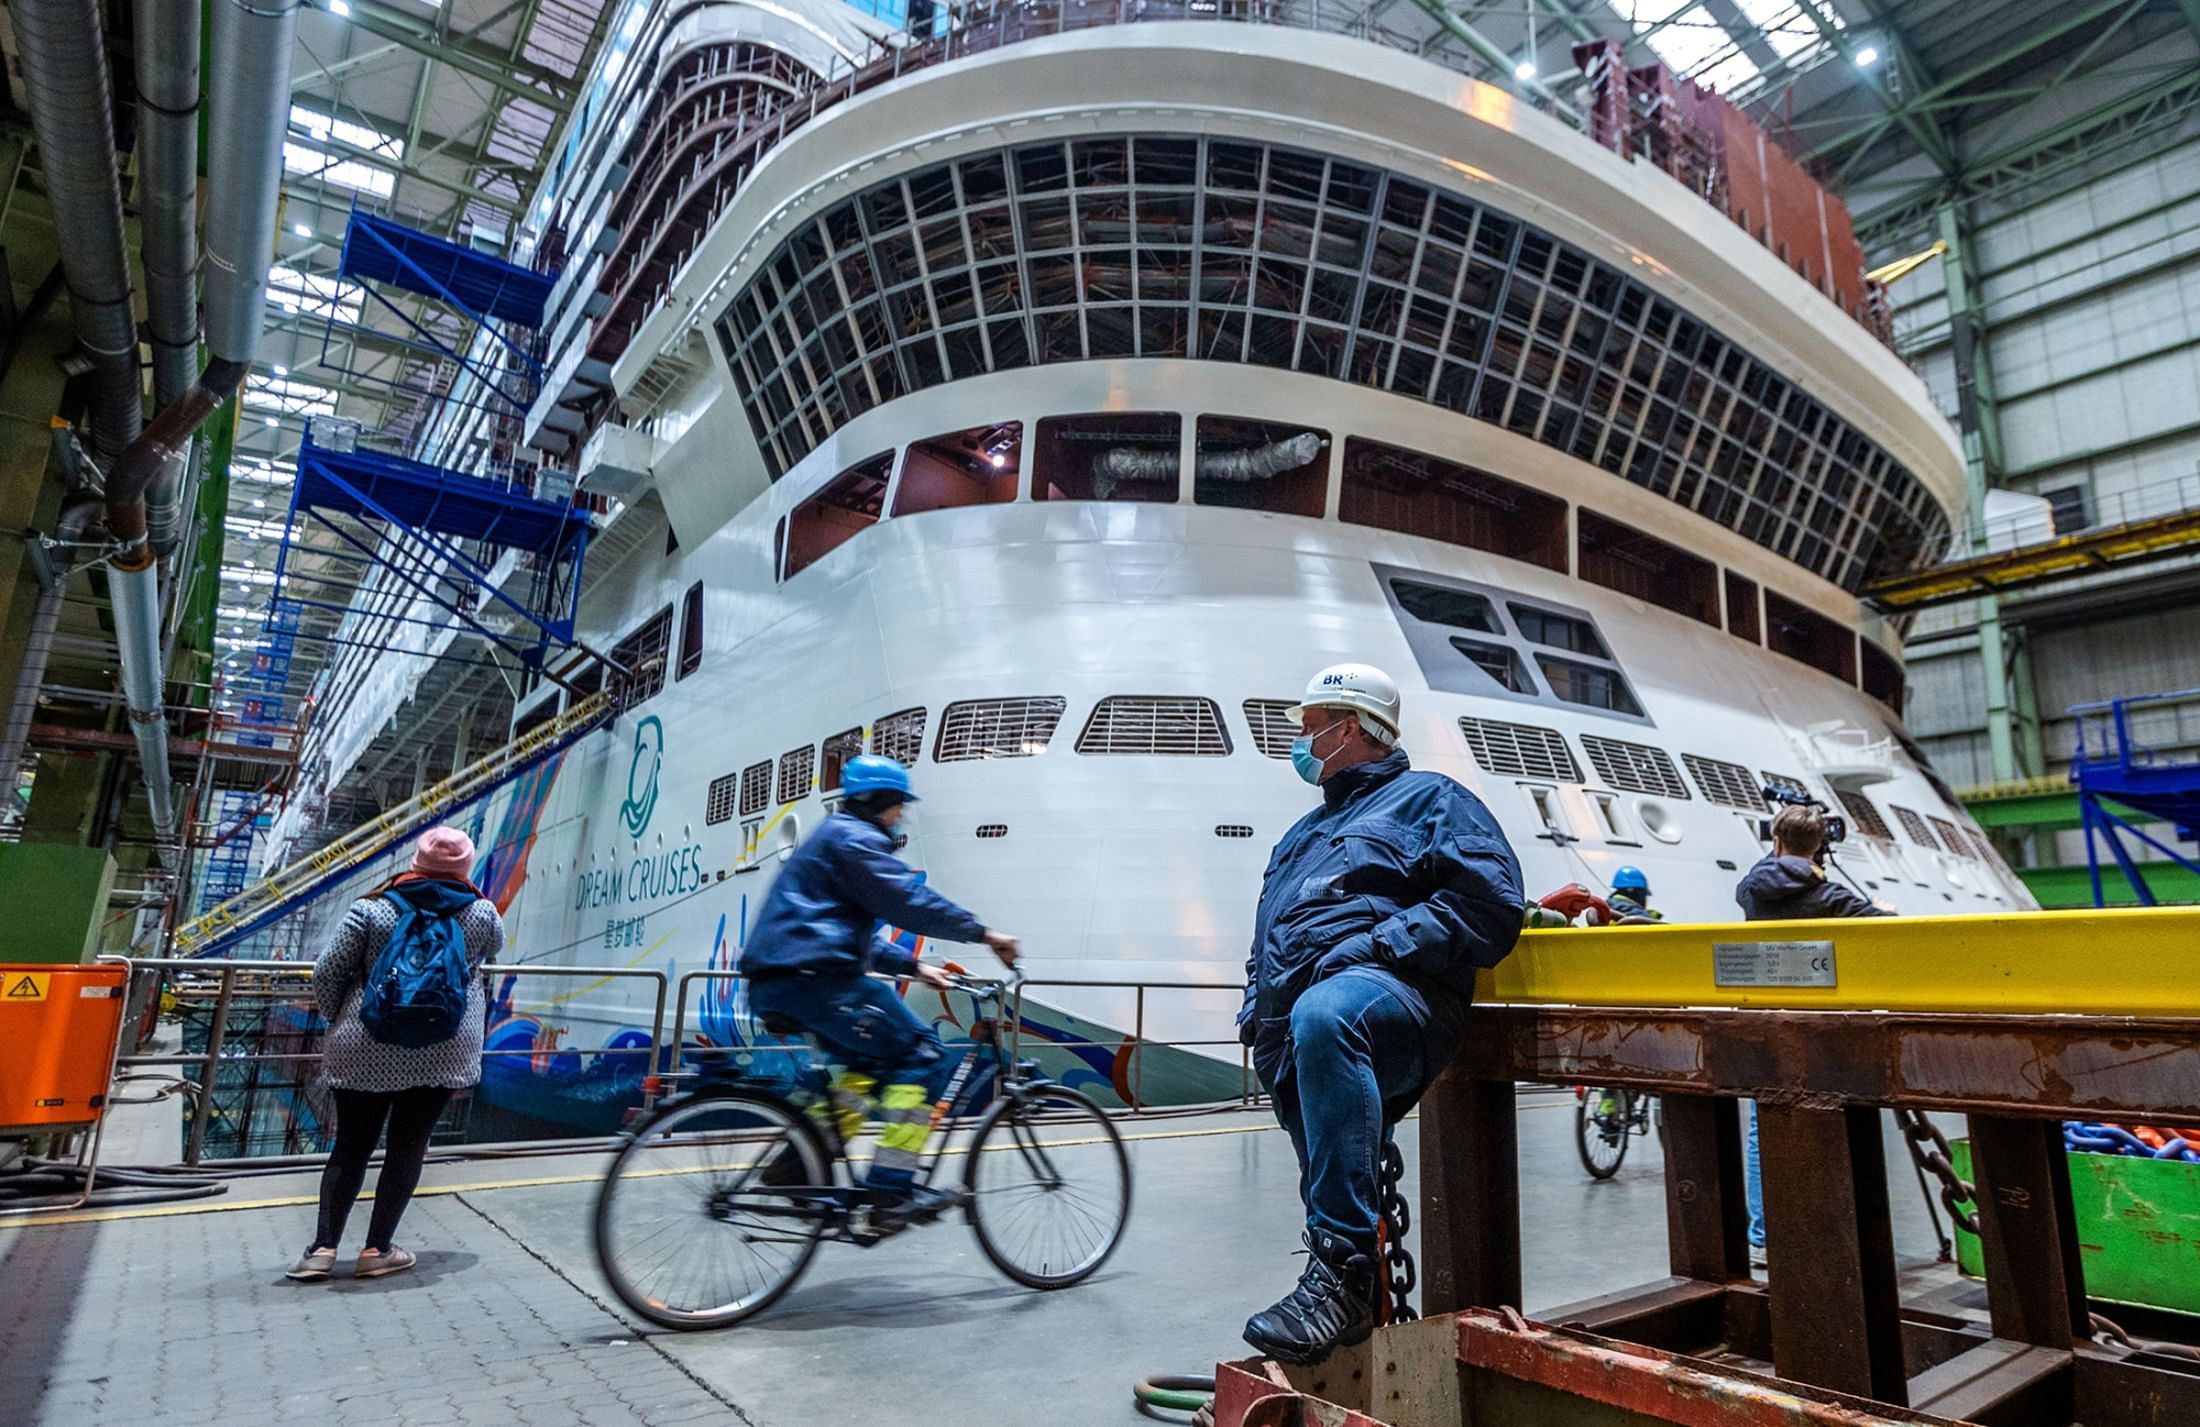 The lower hull of a liner known as Global Dream II, the second global class vessel from insolvent MV Werften shipyard on Germany’s Baltic coast, is to be disposed of at scrap price, An Bord reported, citing insolvency administrator Christoph Morgen. Credit: Bloomberg Photo